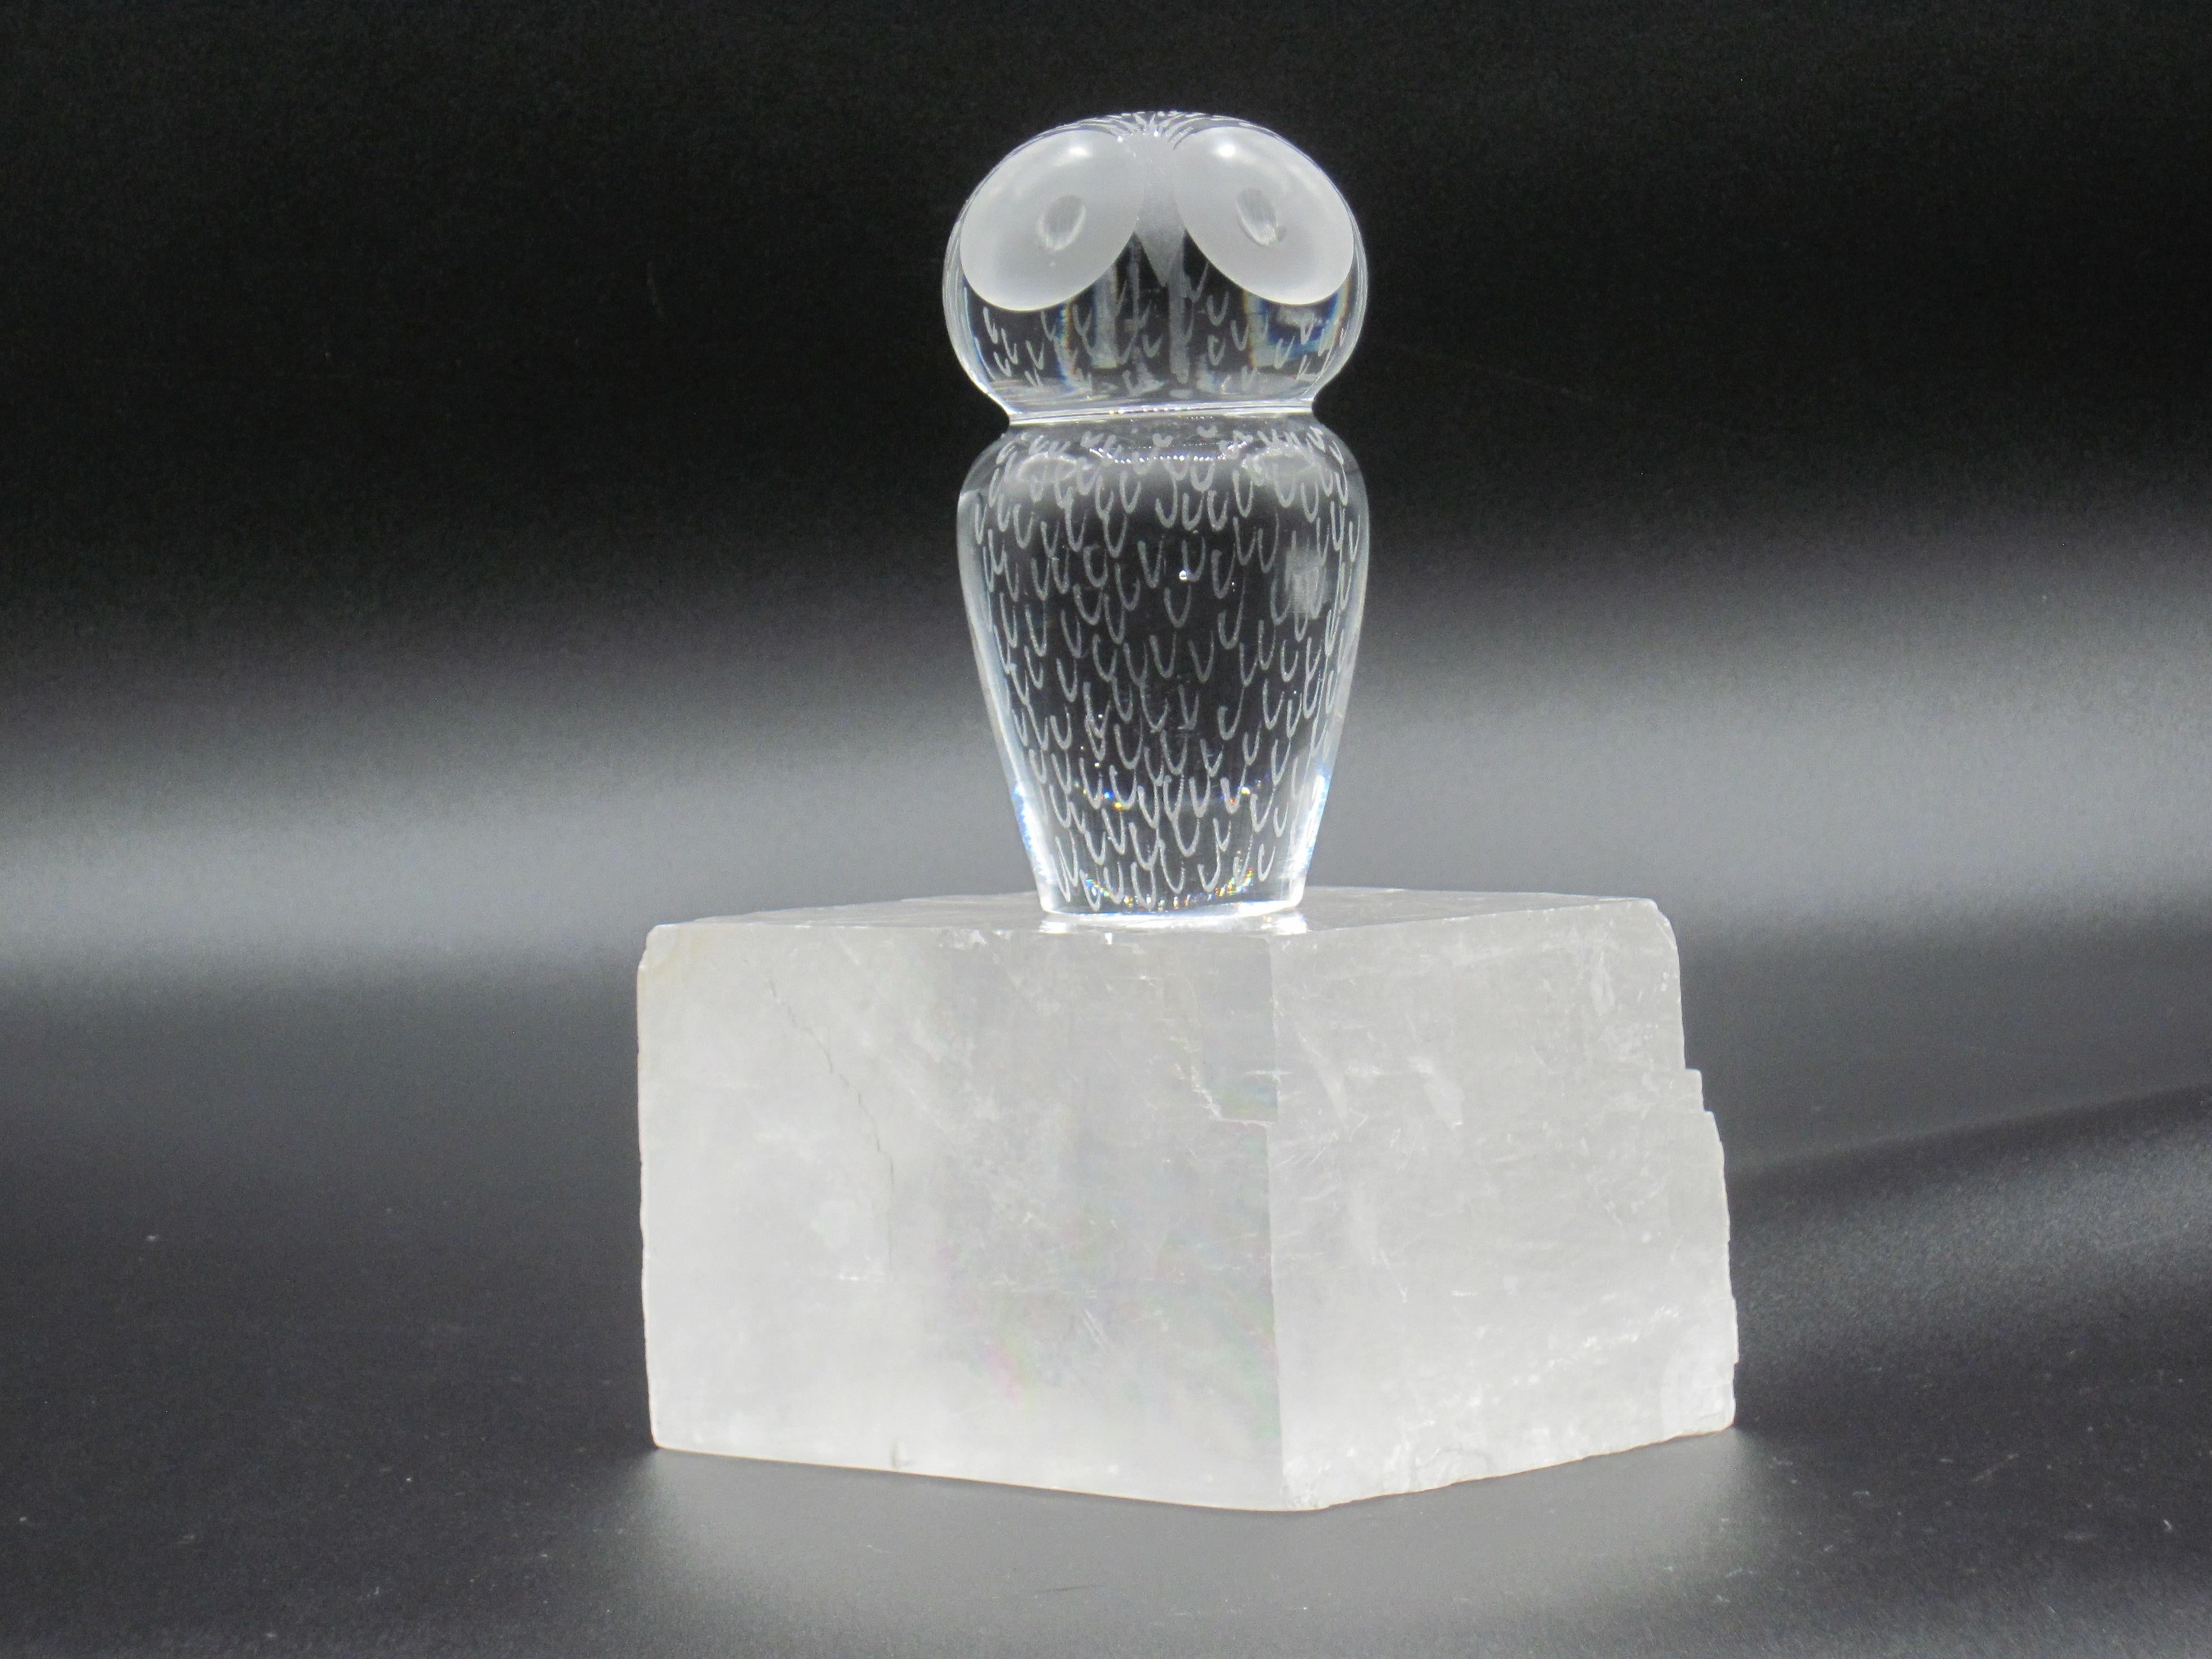 A Kosta crystal paperwieght by Vicke Lindstrand with etched eyes and feathers on head and front side of body. Underside is signed Kosta 92458 Lindstrand.

Elis Berg started as a designer and became the artistic director at Kosta. In 1950 he left